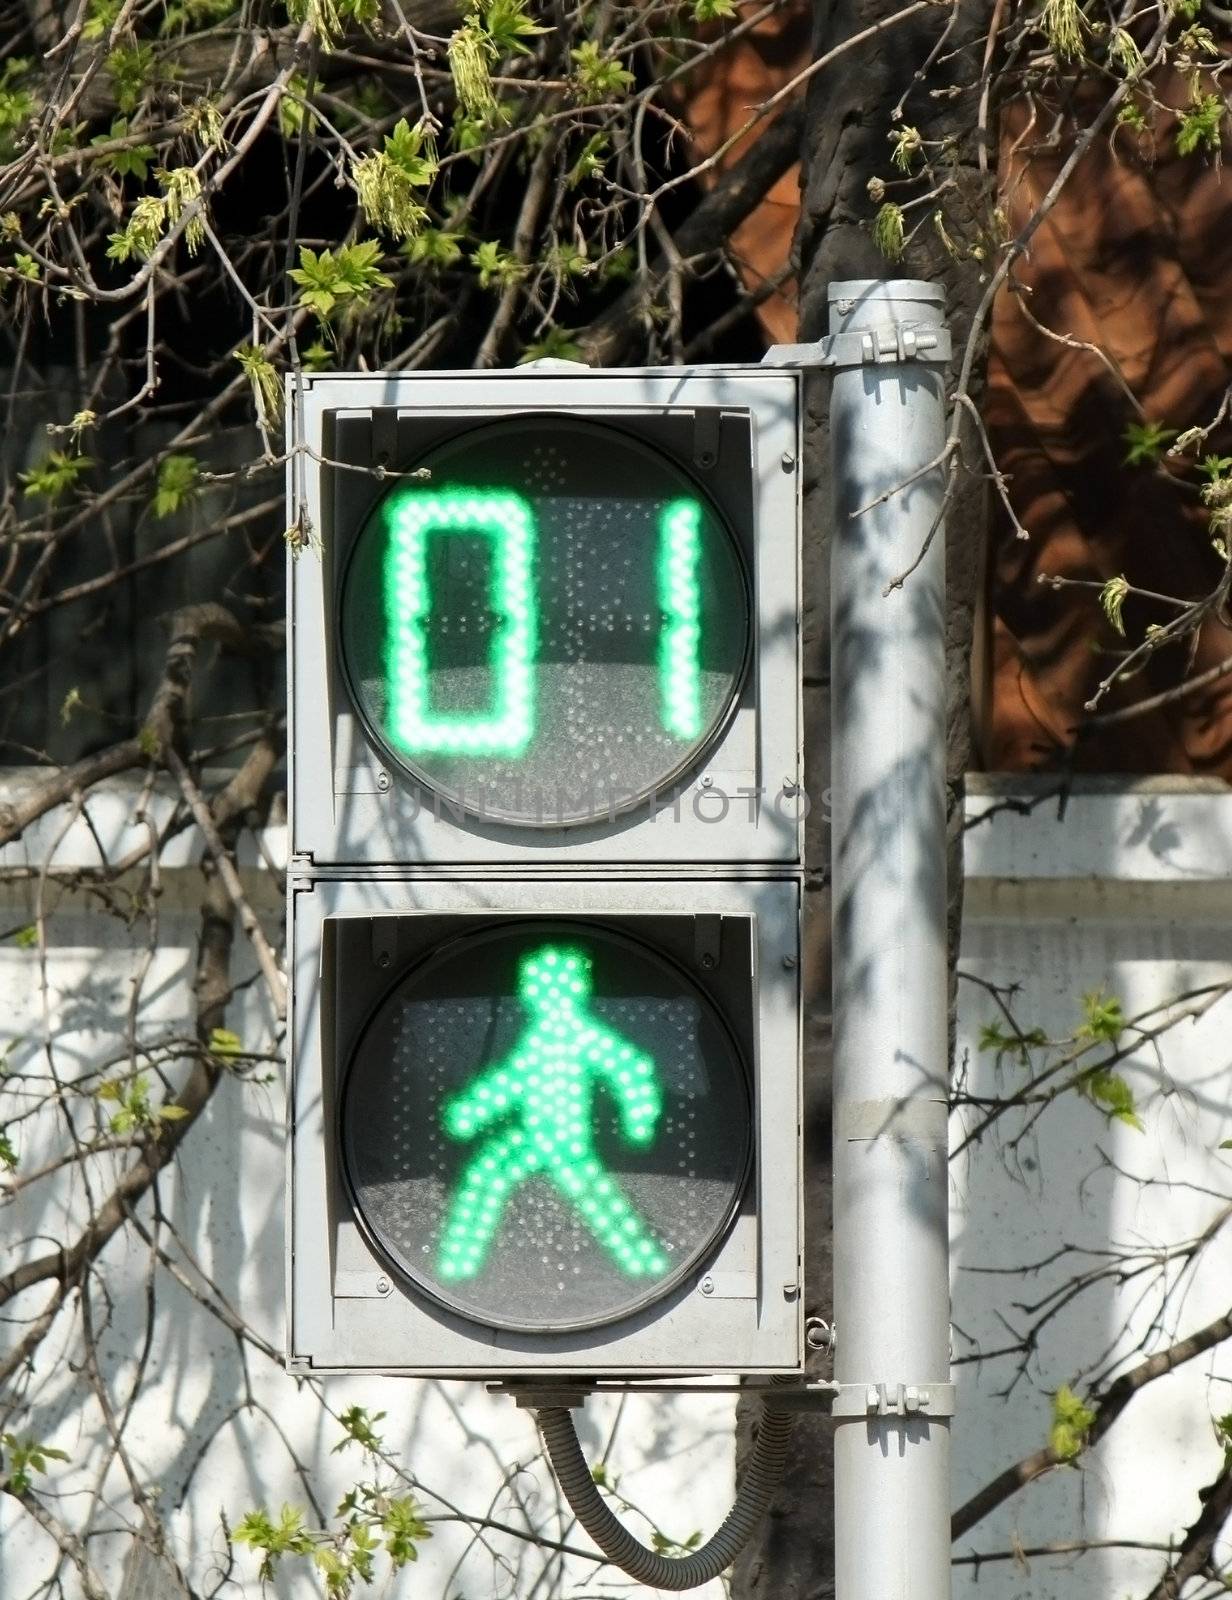 Pedestrian traffic light with one second left